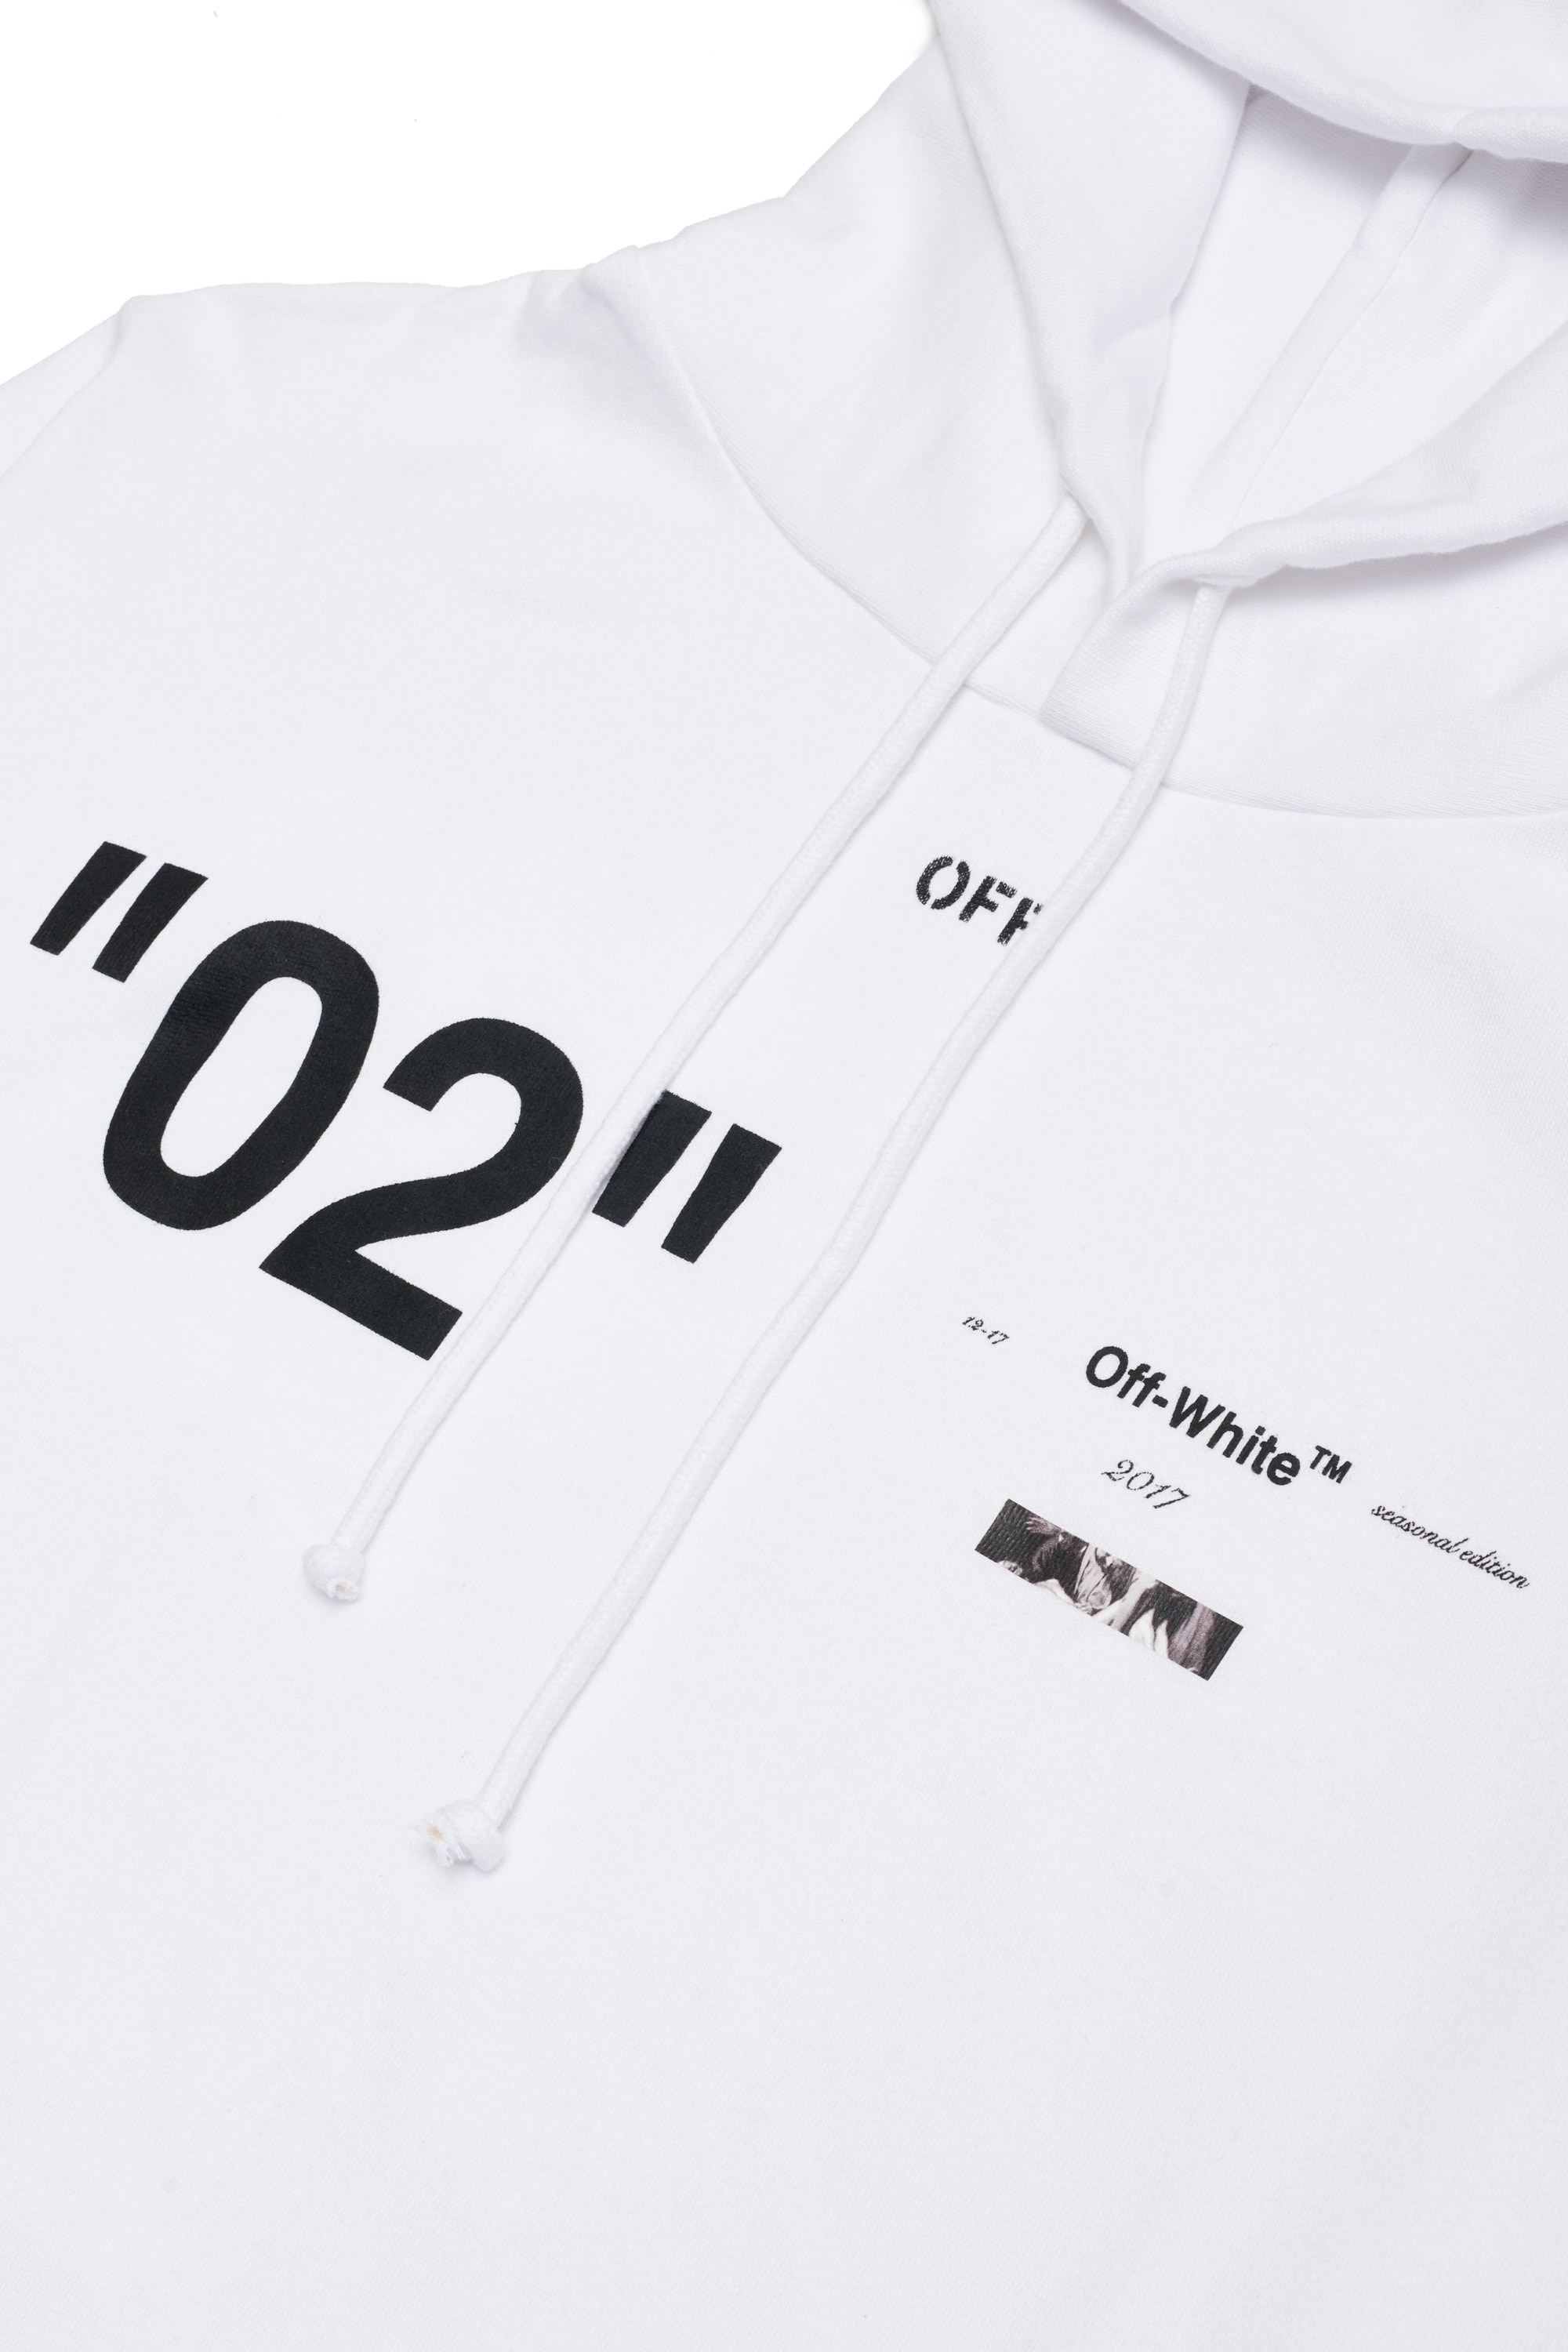 OFF-WHITE’s Latest Capsule Collection Is Catered “FOR ALL” - MASSES